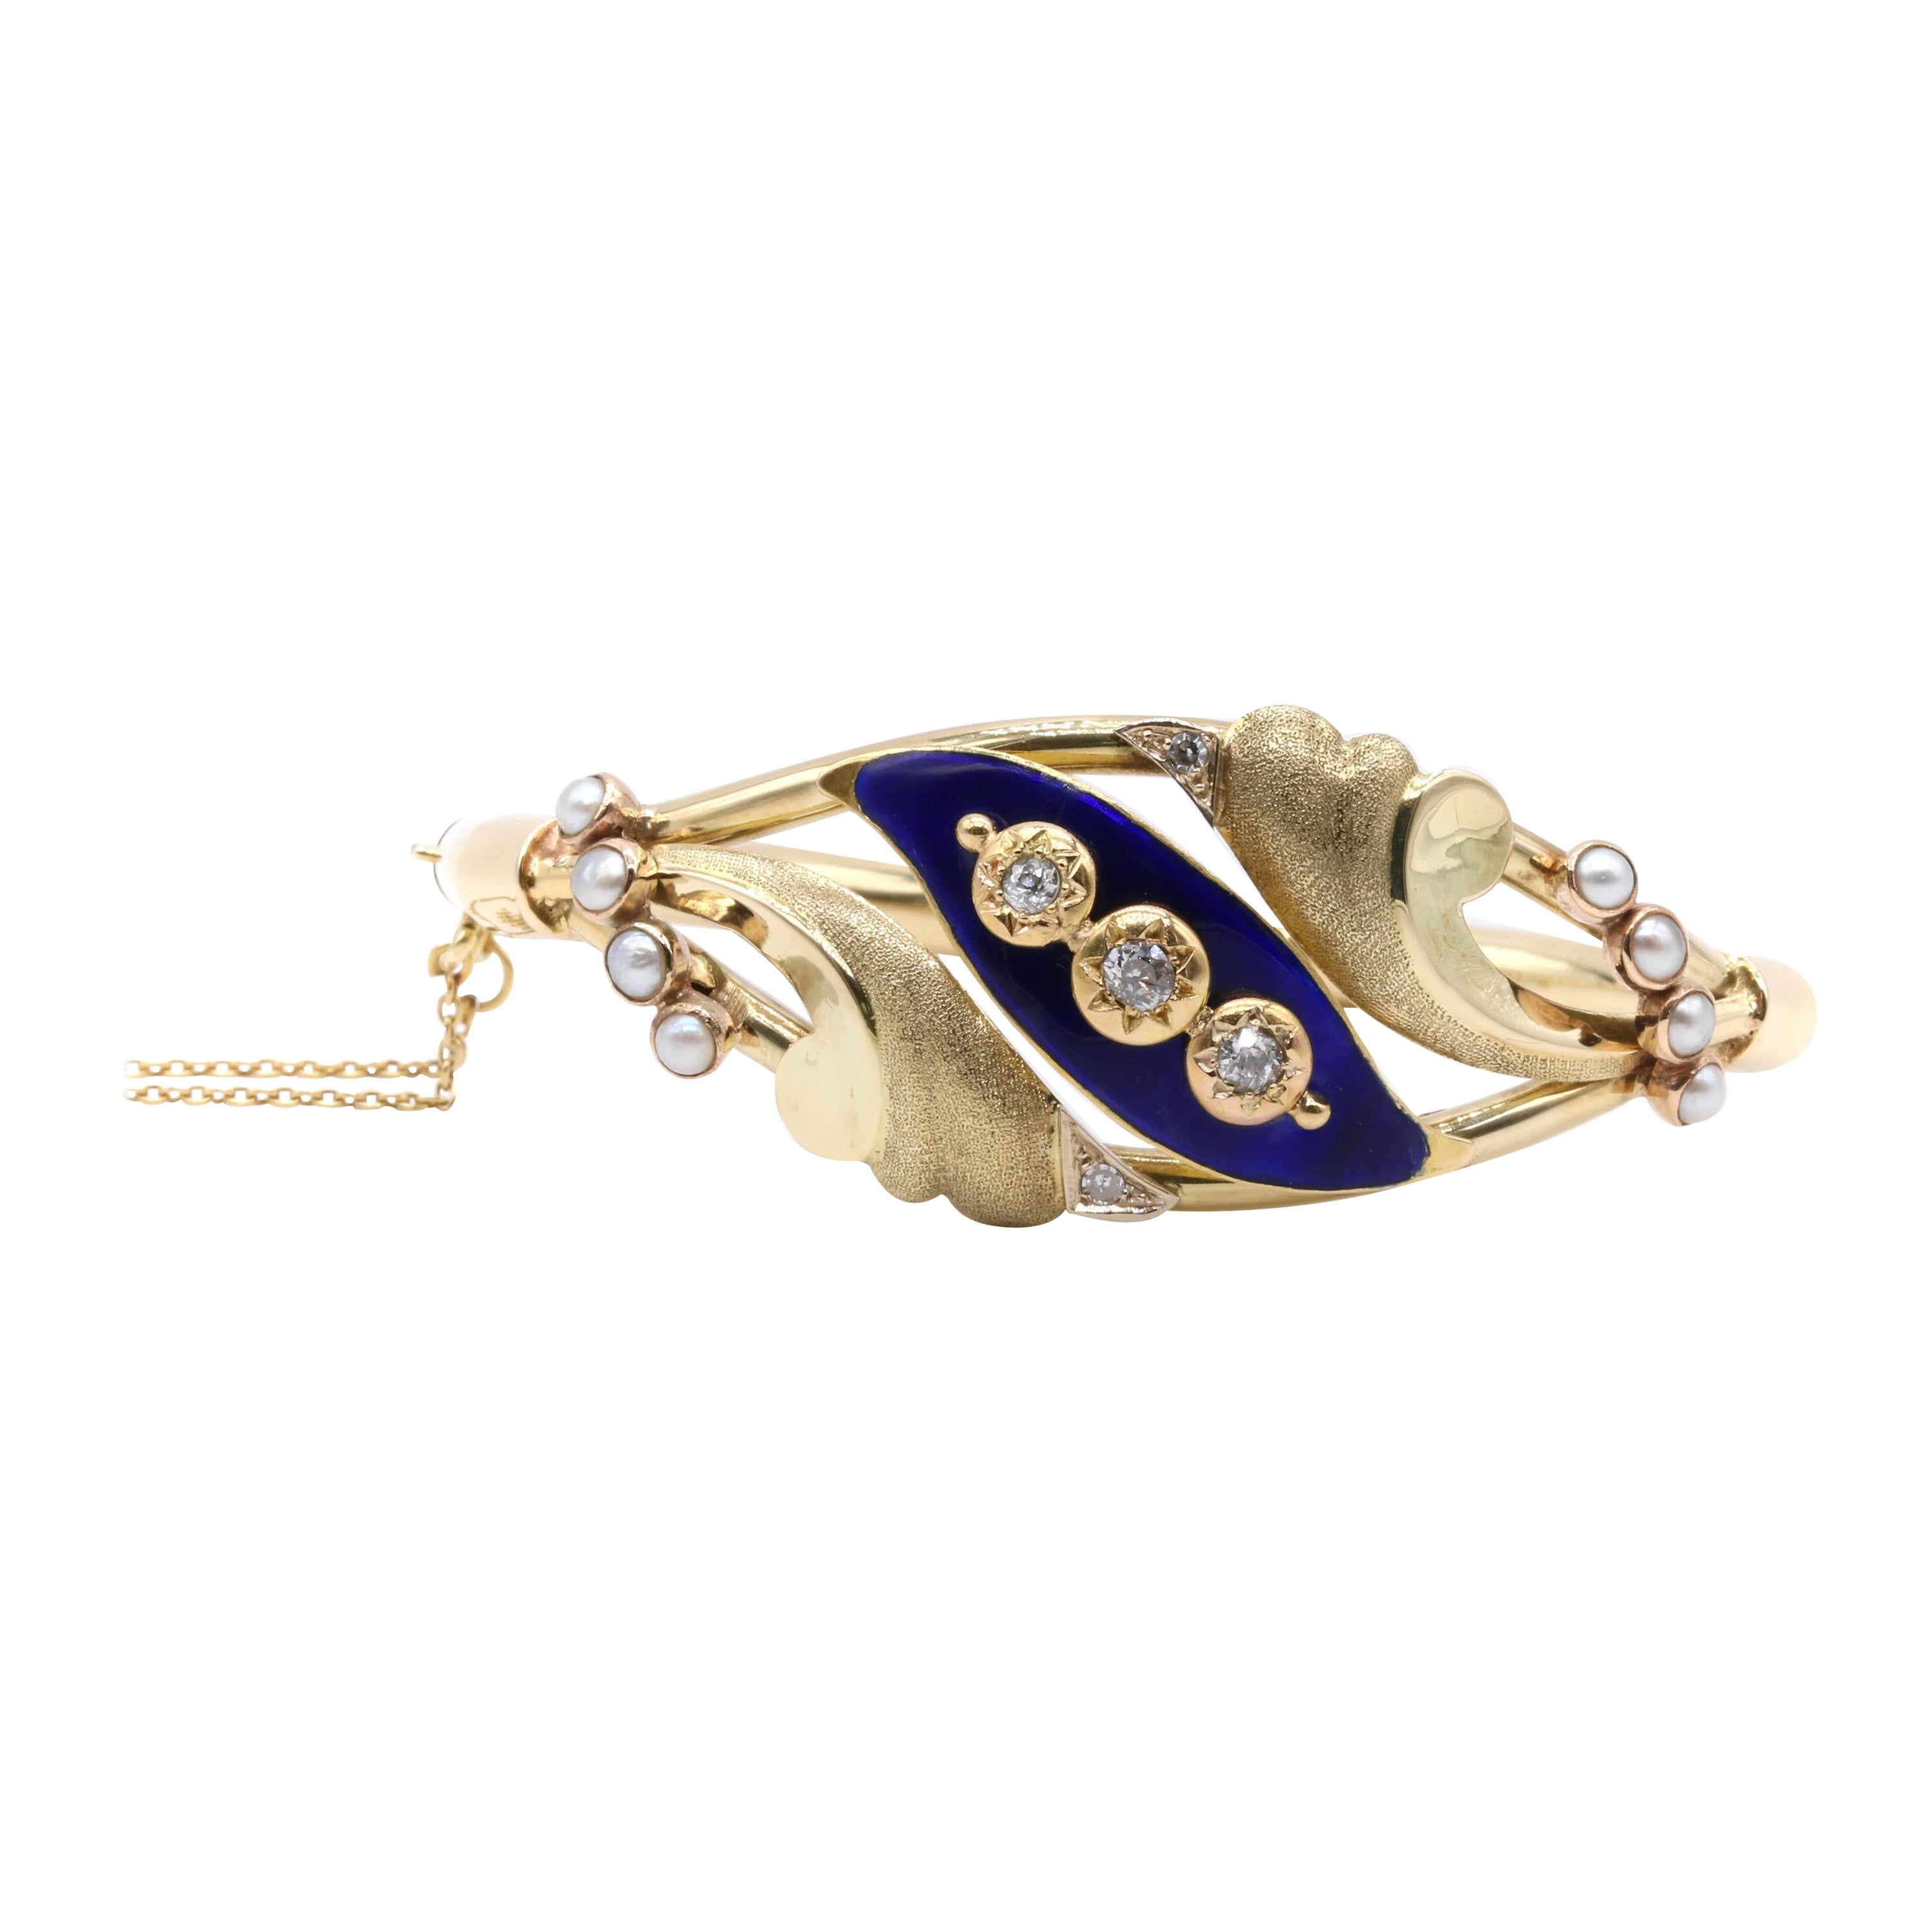 Antique Victorian 27g 14K Yellow Gold Diamond, Pearl and Blue Enamel Bracelet For Sale